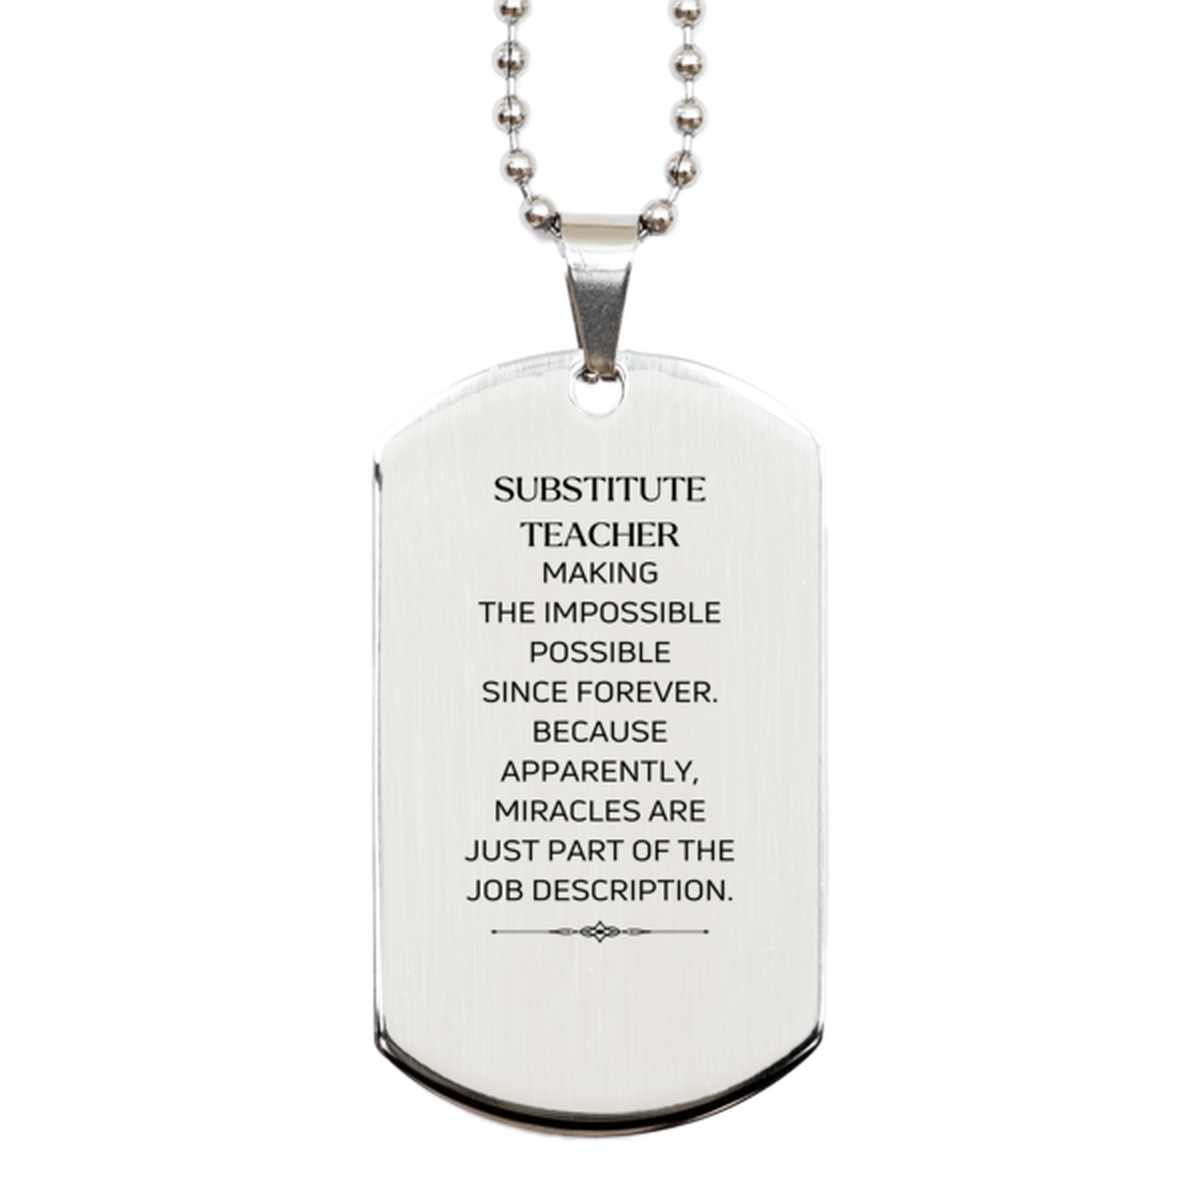 Funny Substitute Teacher Gifts, Miracles are just part of the job description, Inspirational Birthday Silver Dog Tag For Substitute Teacher, Men, Women, Coworkers, Friends, Boss